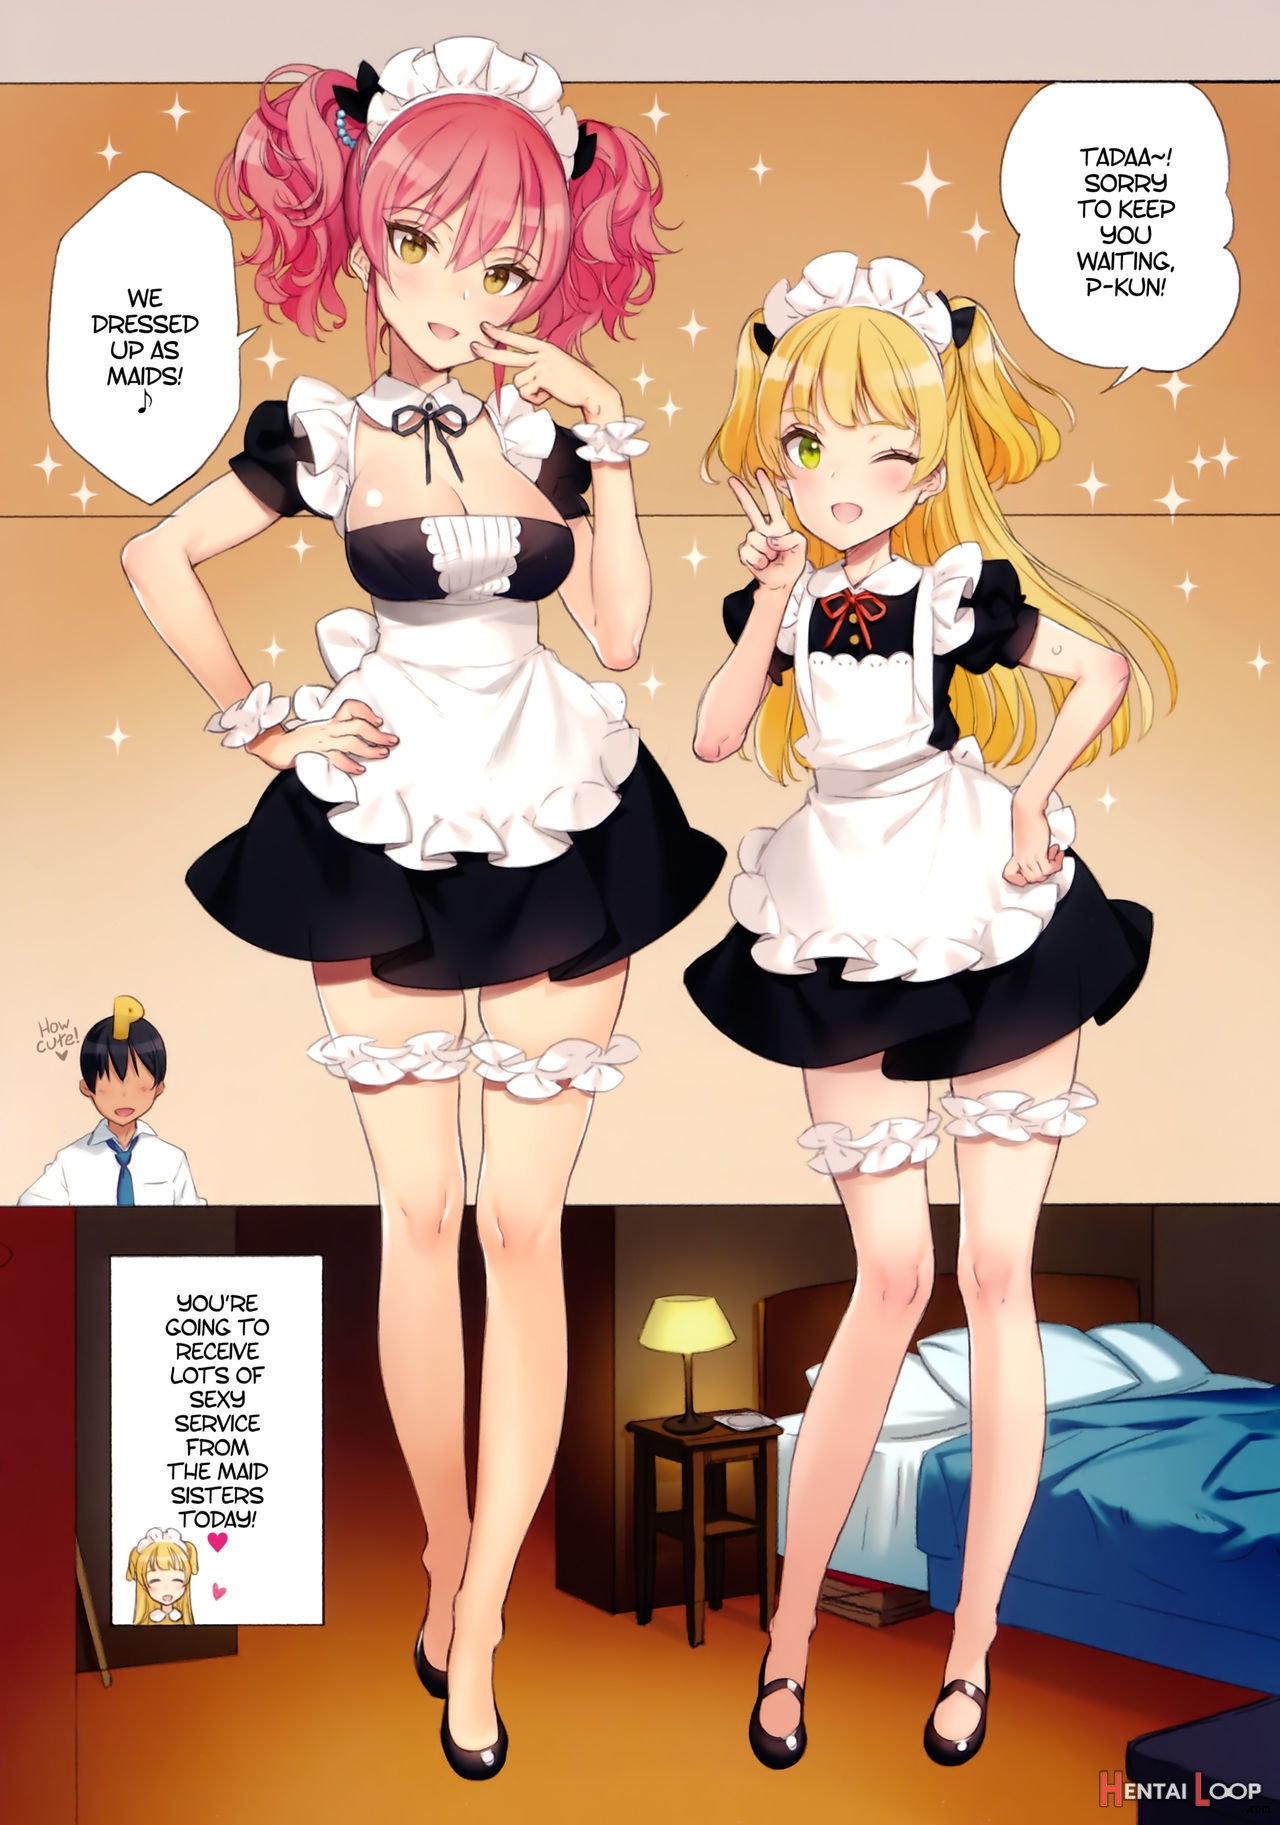 Order*maid*sisters - A Book About Having Maid Sex With The Jougasaki Sisters page 5